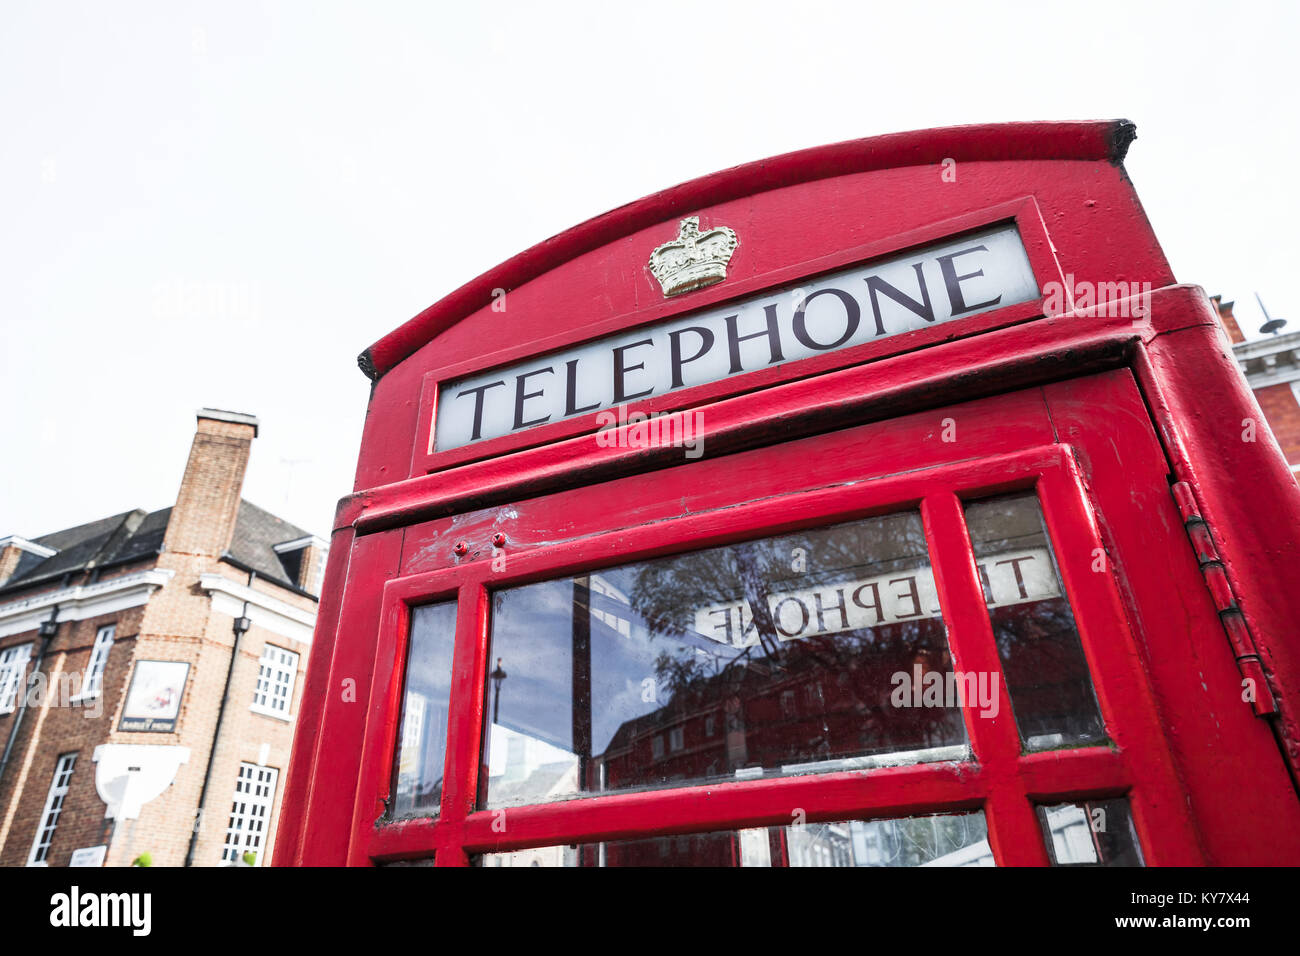 London, United Kingdom - October 30, 2017: K6, the most common red telephone box model, photographed in London city Stock Photo